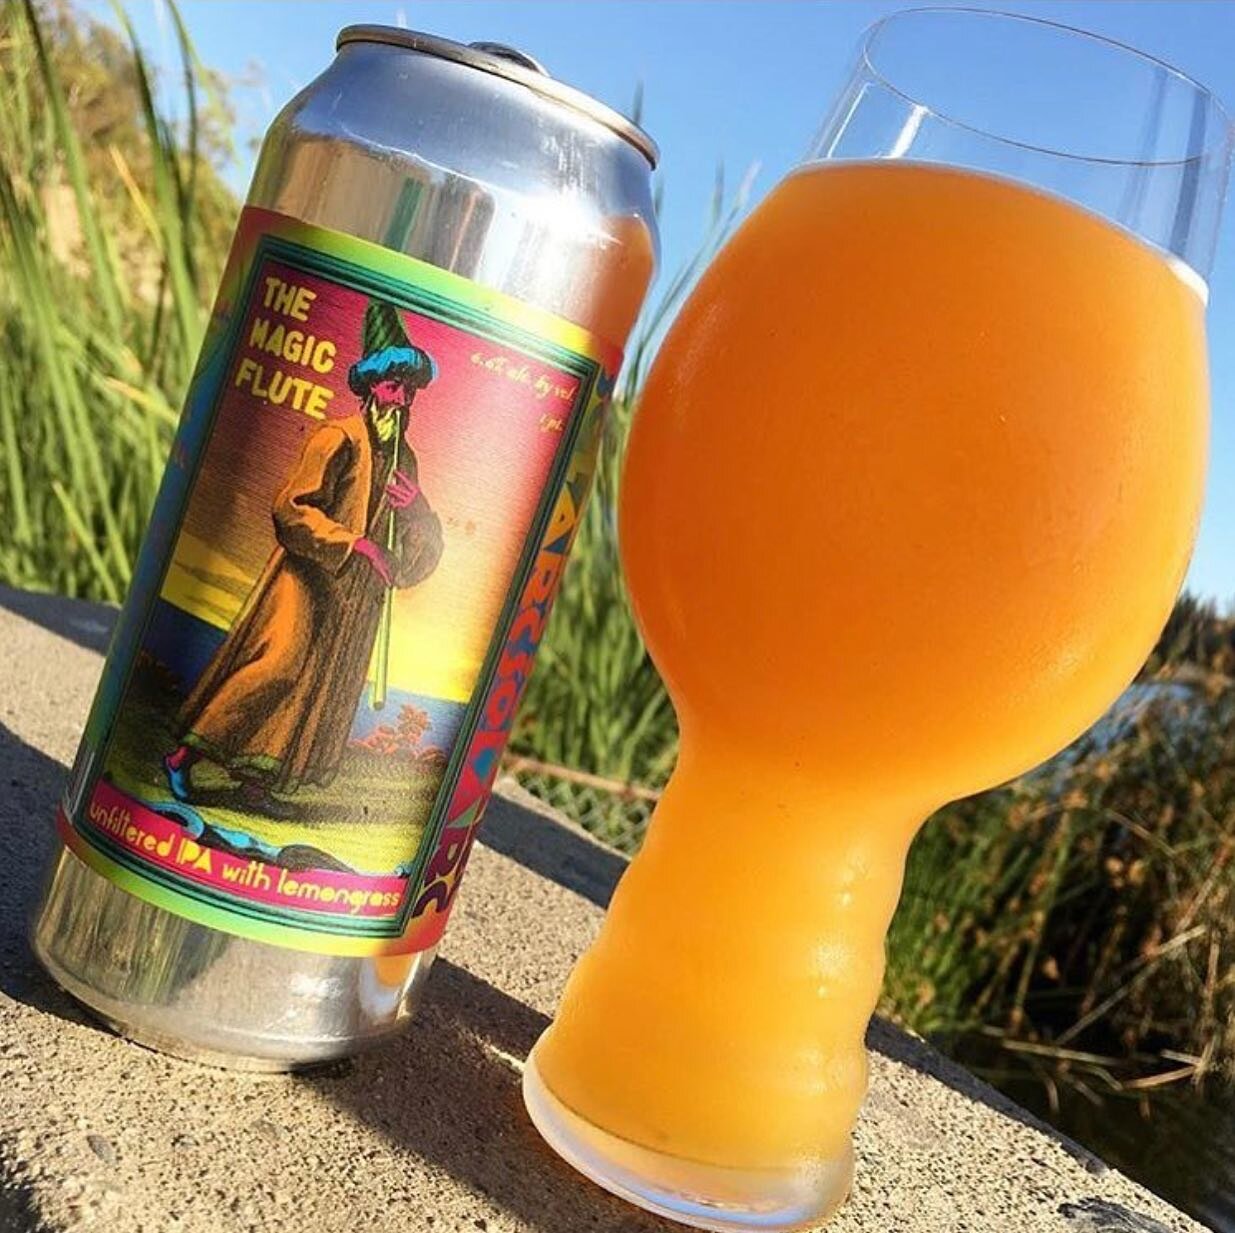 TBT to 2 years ago? Time flies...came across this one in the ol recipe log, interested in testing some more variations on this theme..unfiltered belgian hoppy herbal summer thing #magicflute #orangejuice ? #beer #losangeles #lemongrass #hops